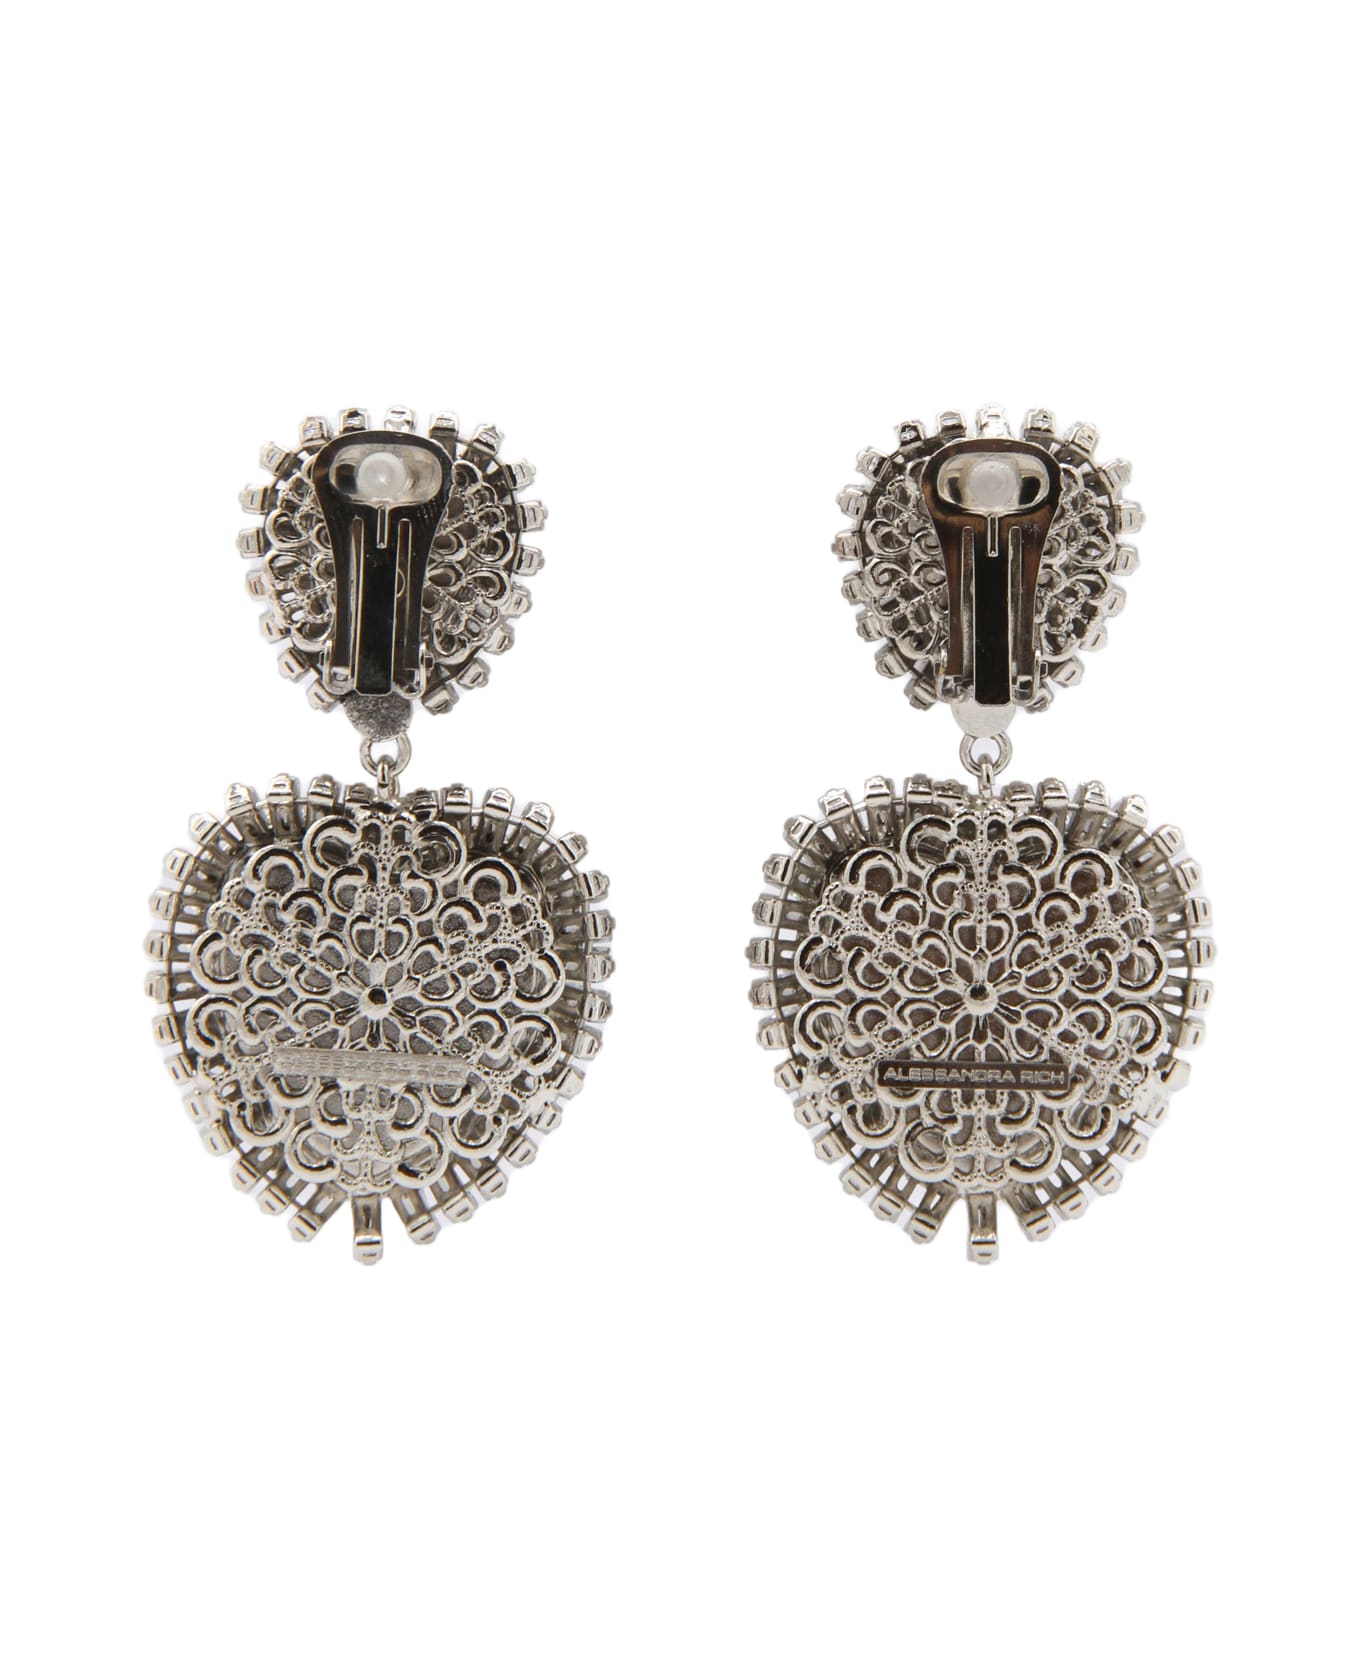 Alessandra Rich Silver-tone Metal Earrings - CRY/SILVER